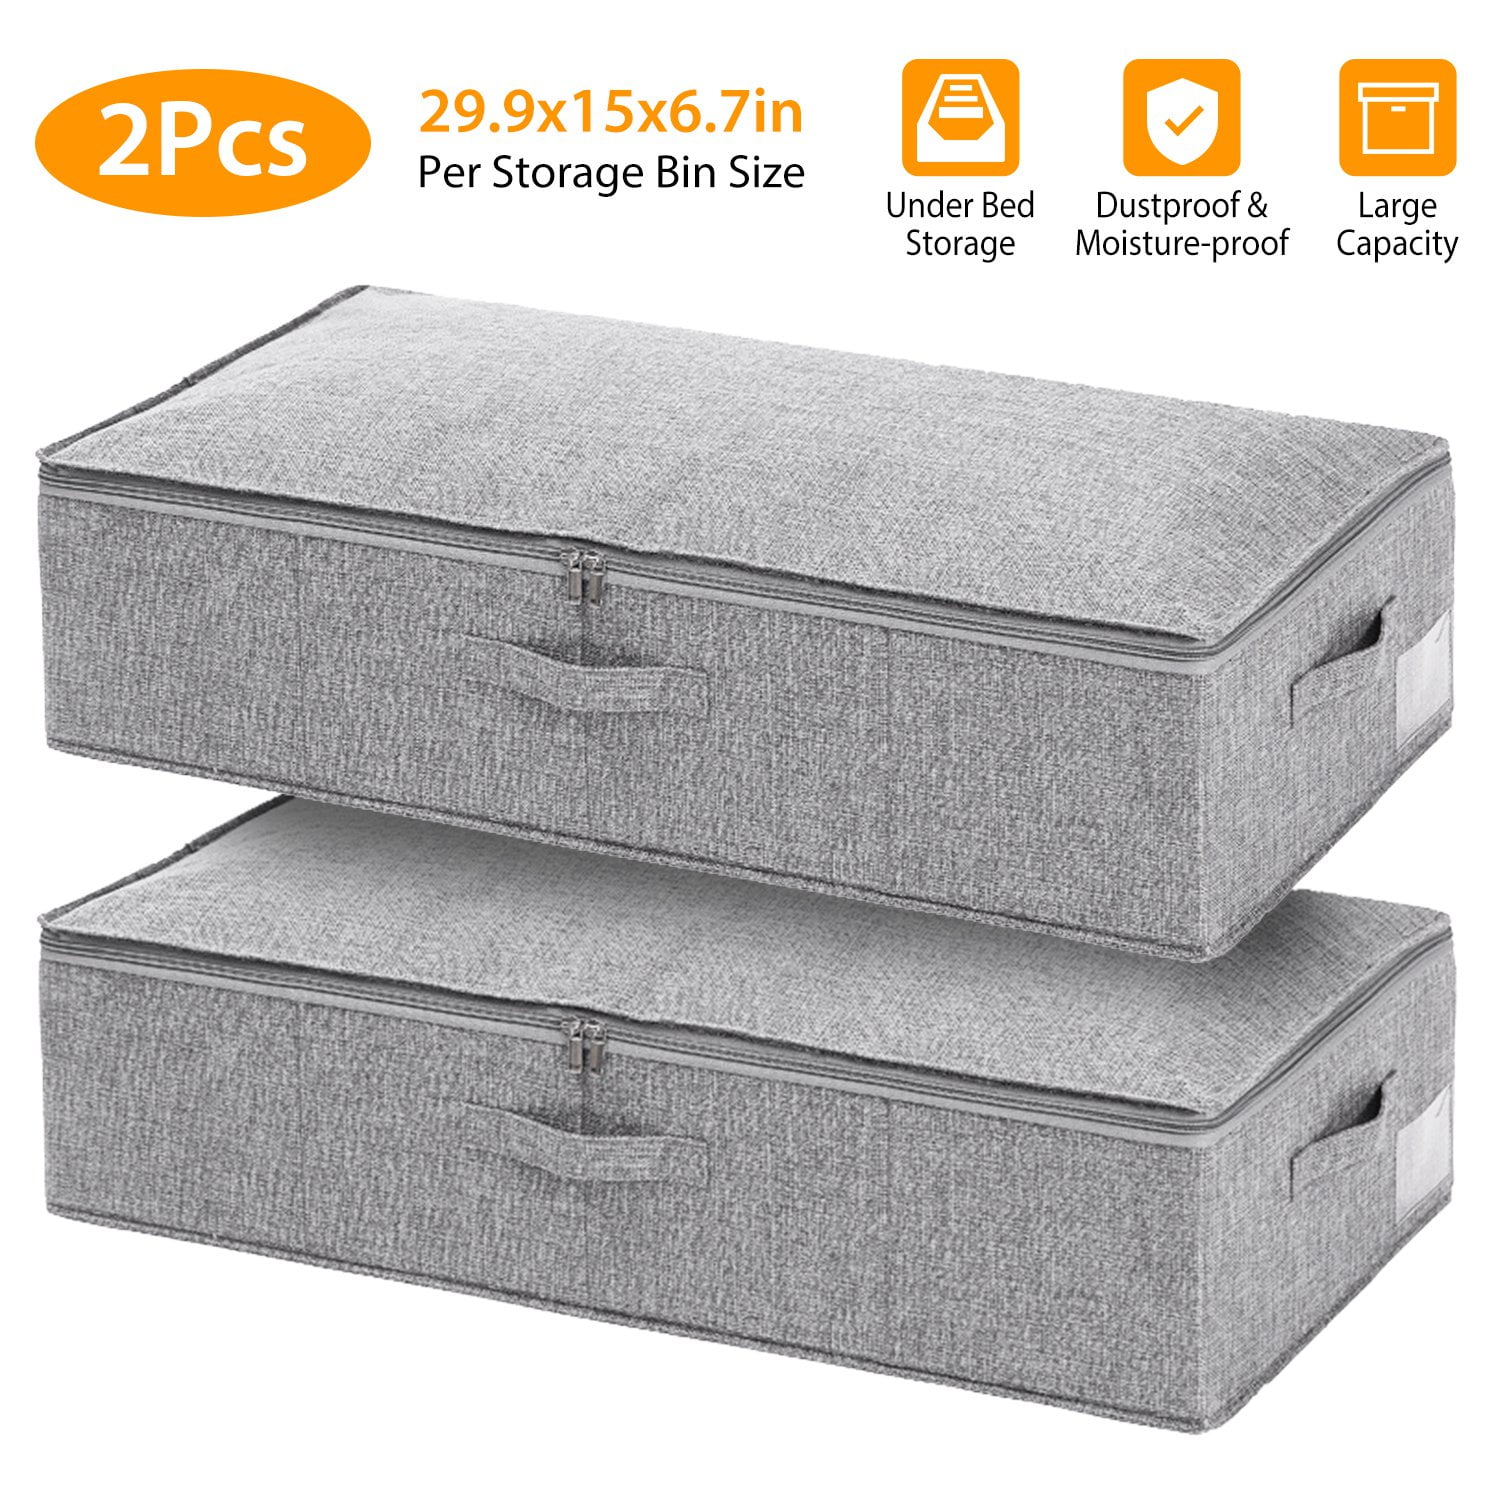 HIGH QUALITY Set of 2 Large Under Bed Storage Box with Wheels 